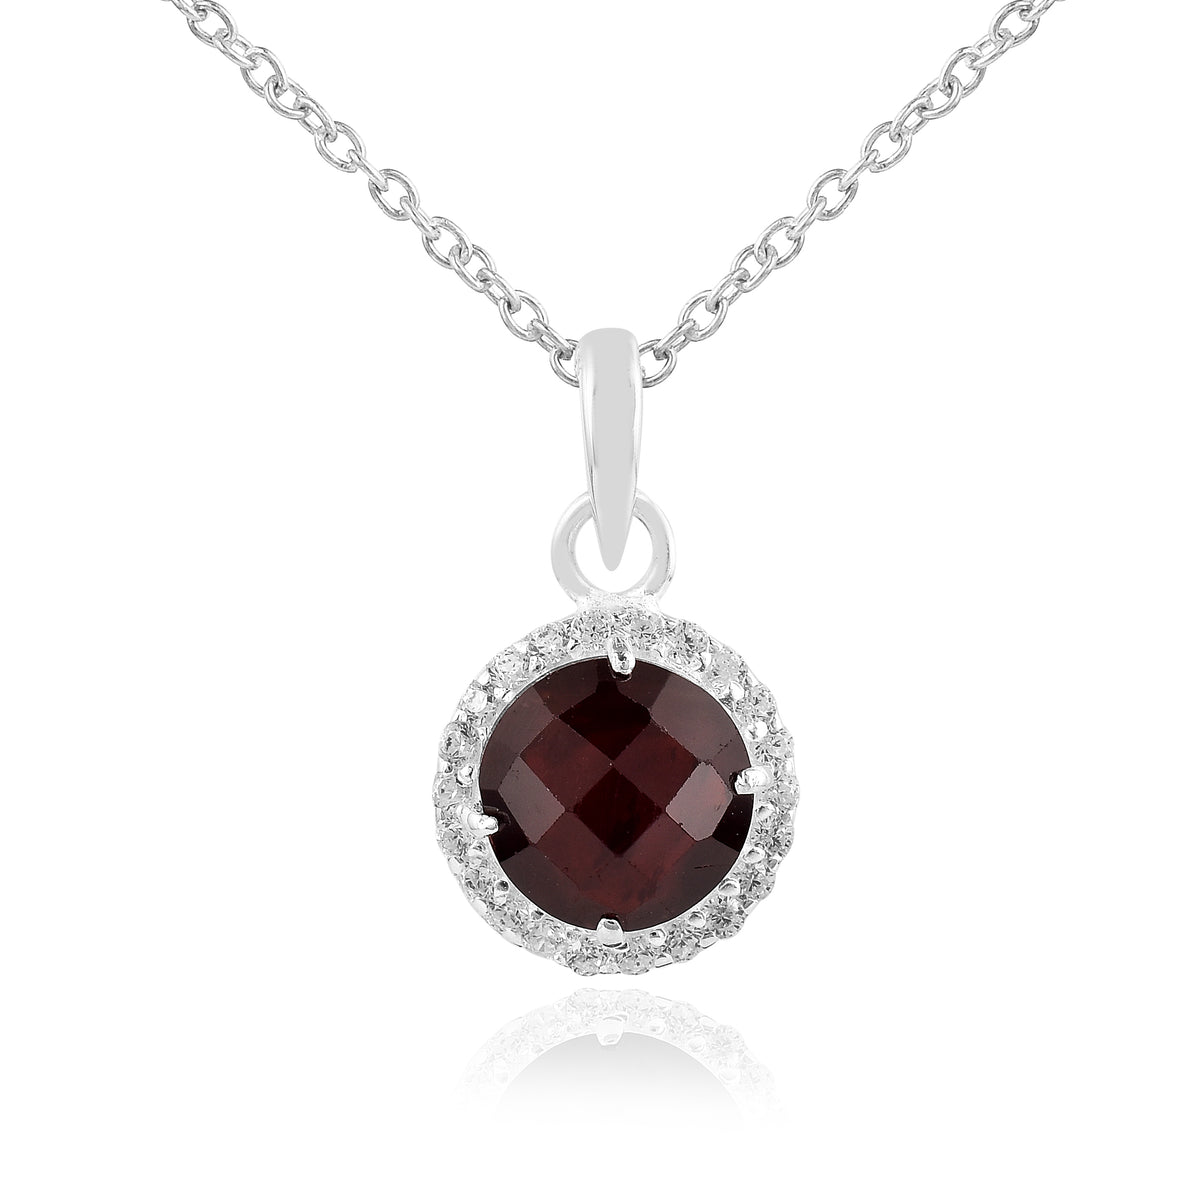 925 Sterling Silver Red Garnet Ball Pendant with Chain Gift for Her